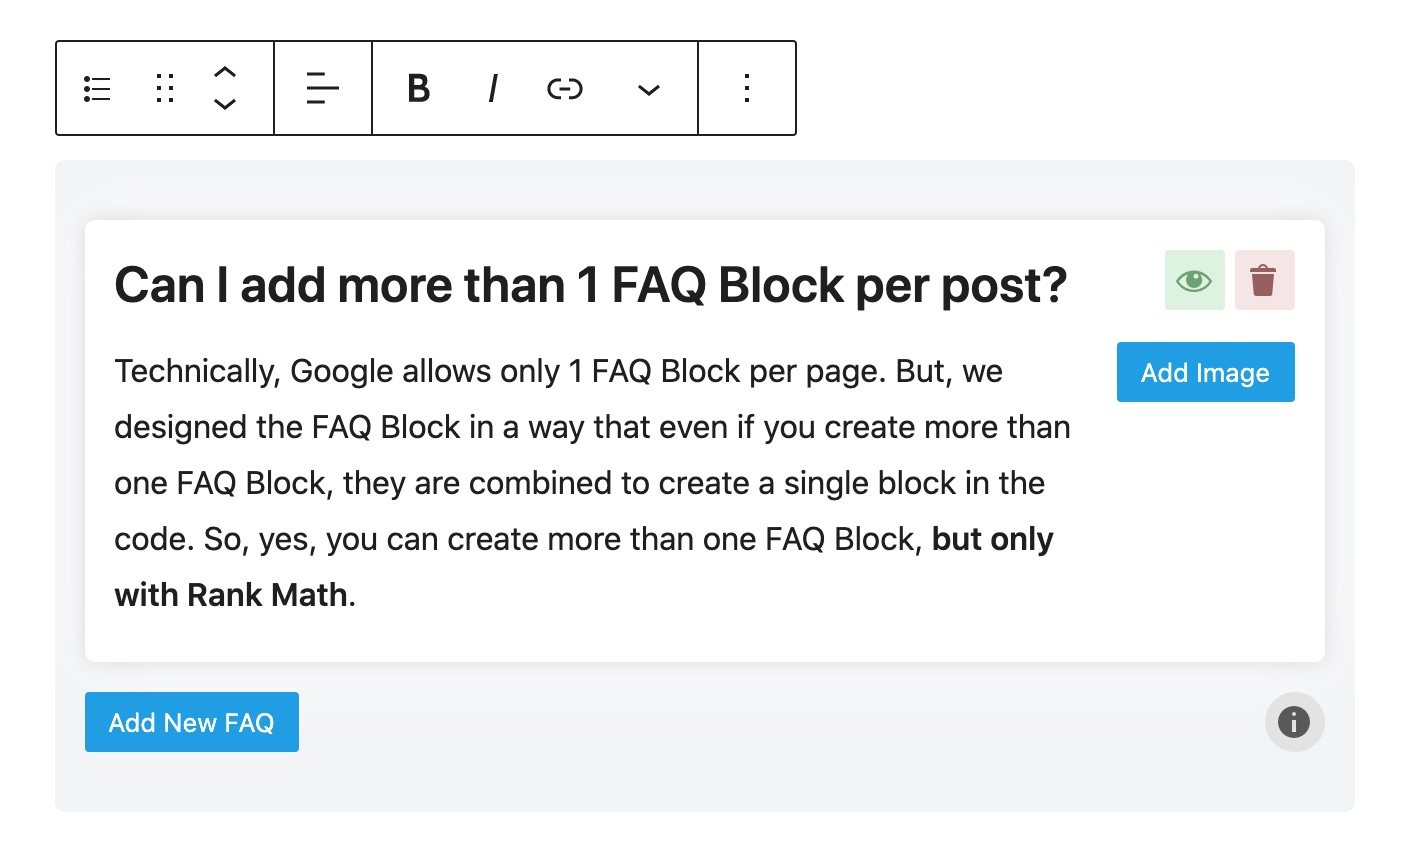 Adding question and answer to FAQ block